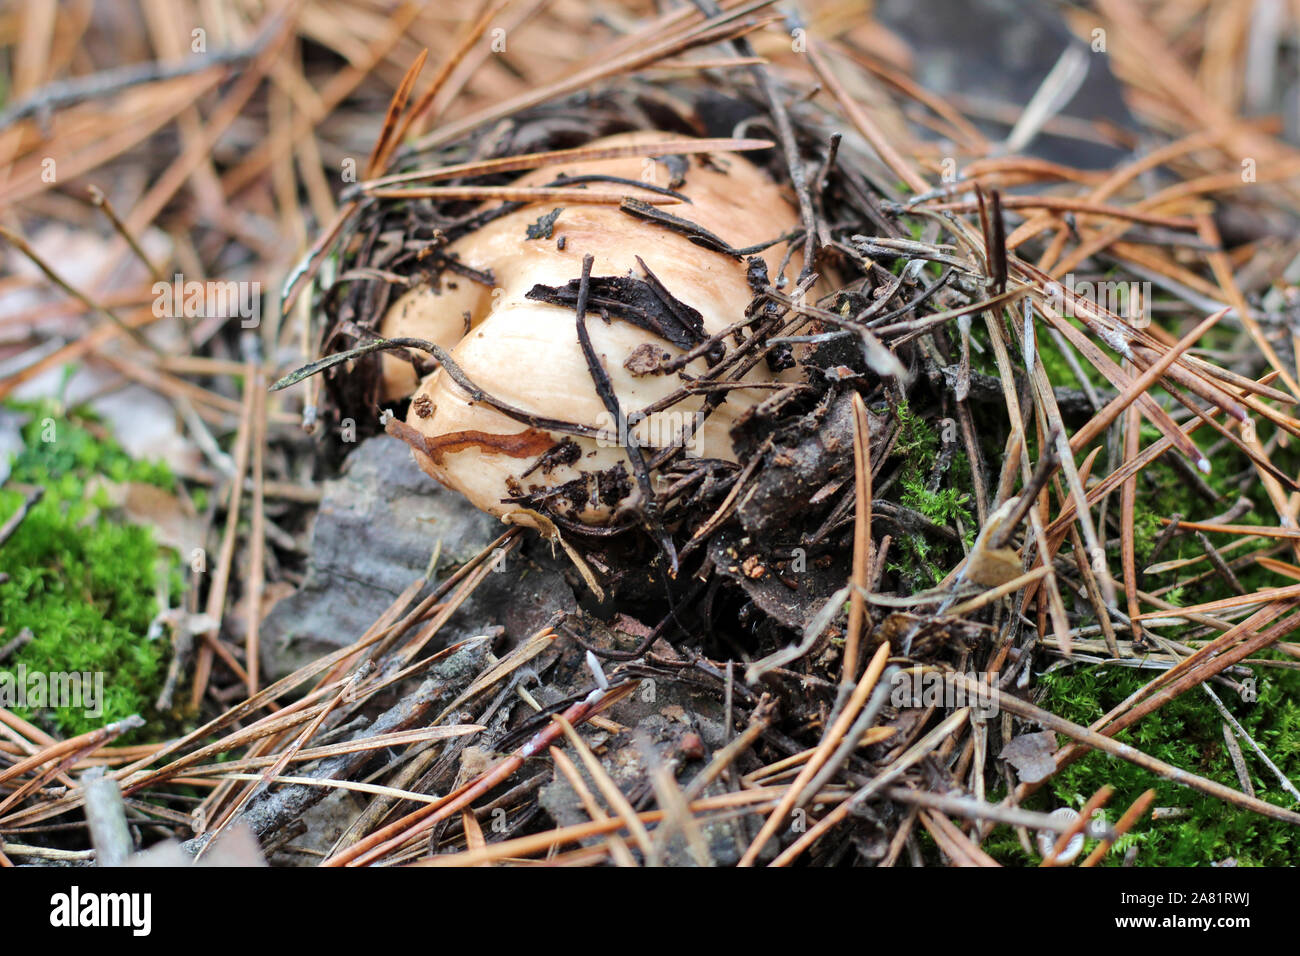 Suillus mushrooms in a pine forest. An armful of dirty, unpeeled, butter fungi in needles and cones. Top view Stock Photo